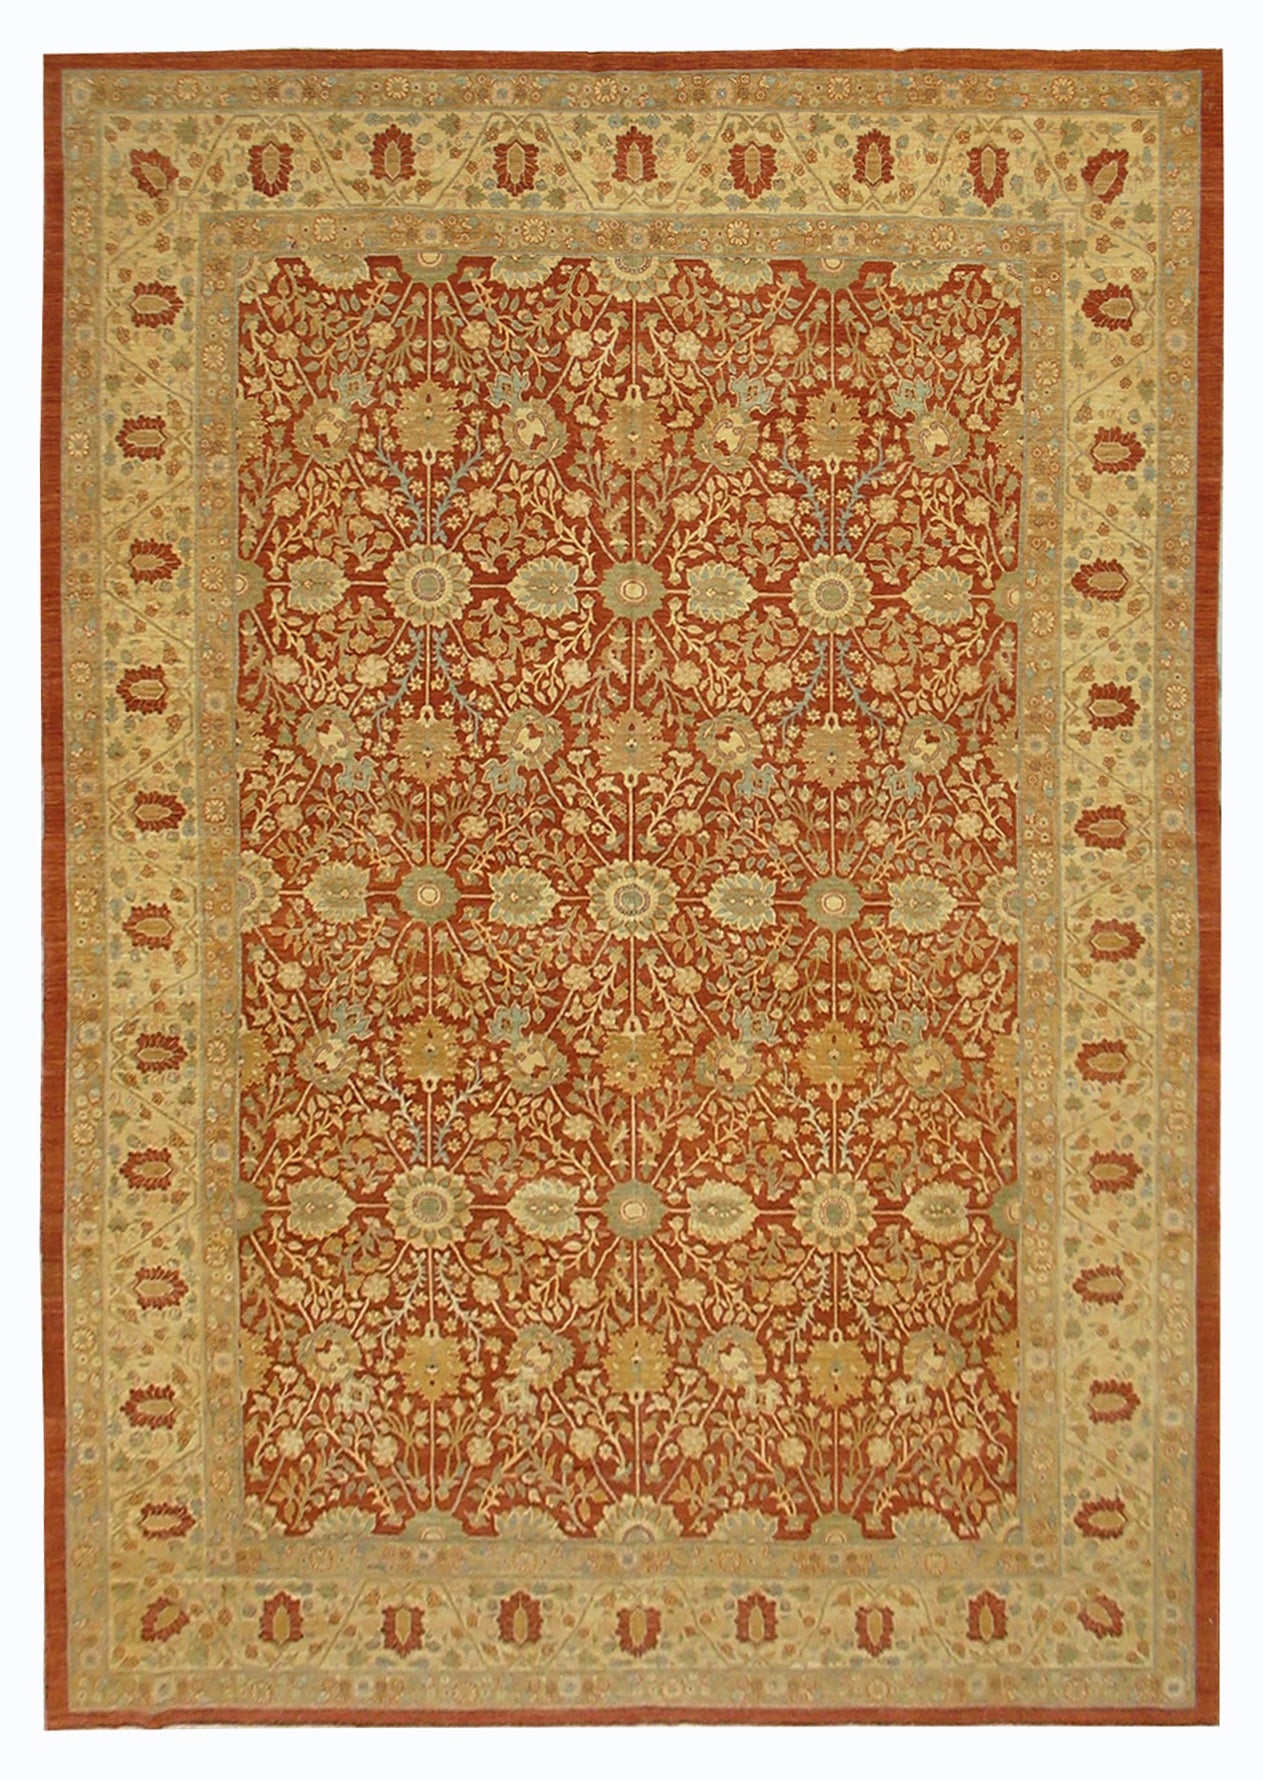 10'x14' Red Orange, Blue and Gold Very Fine Tabriz Design Wool and Silk Highlight Ariana Traditional